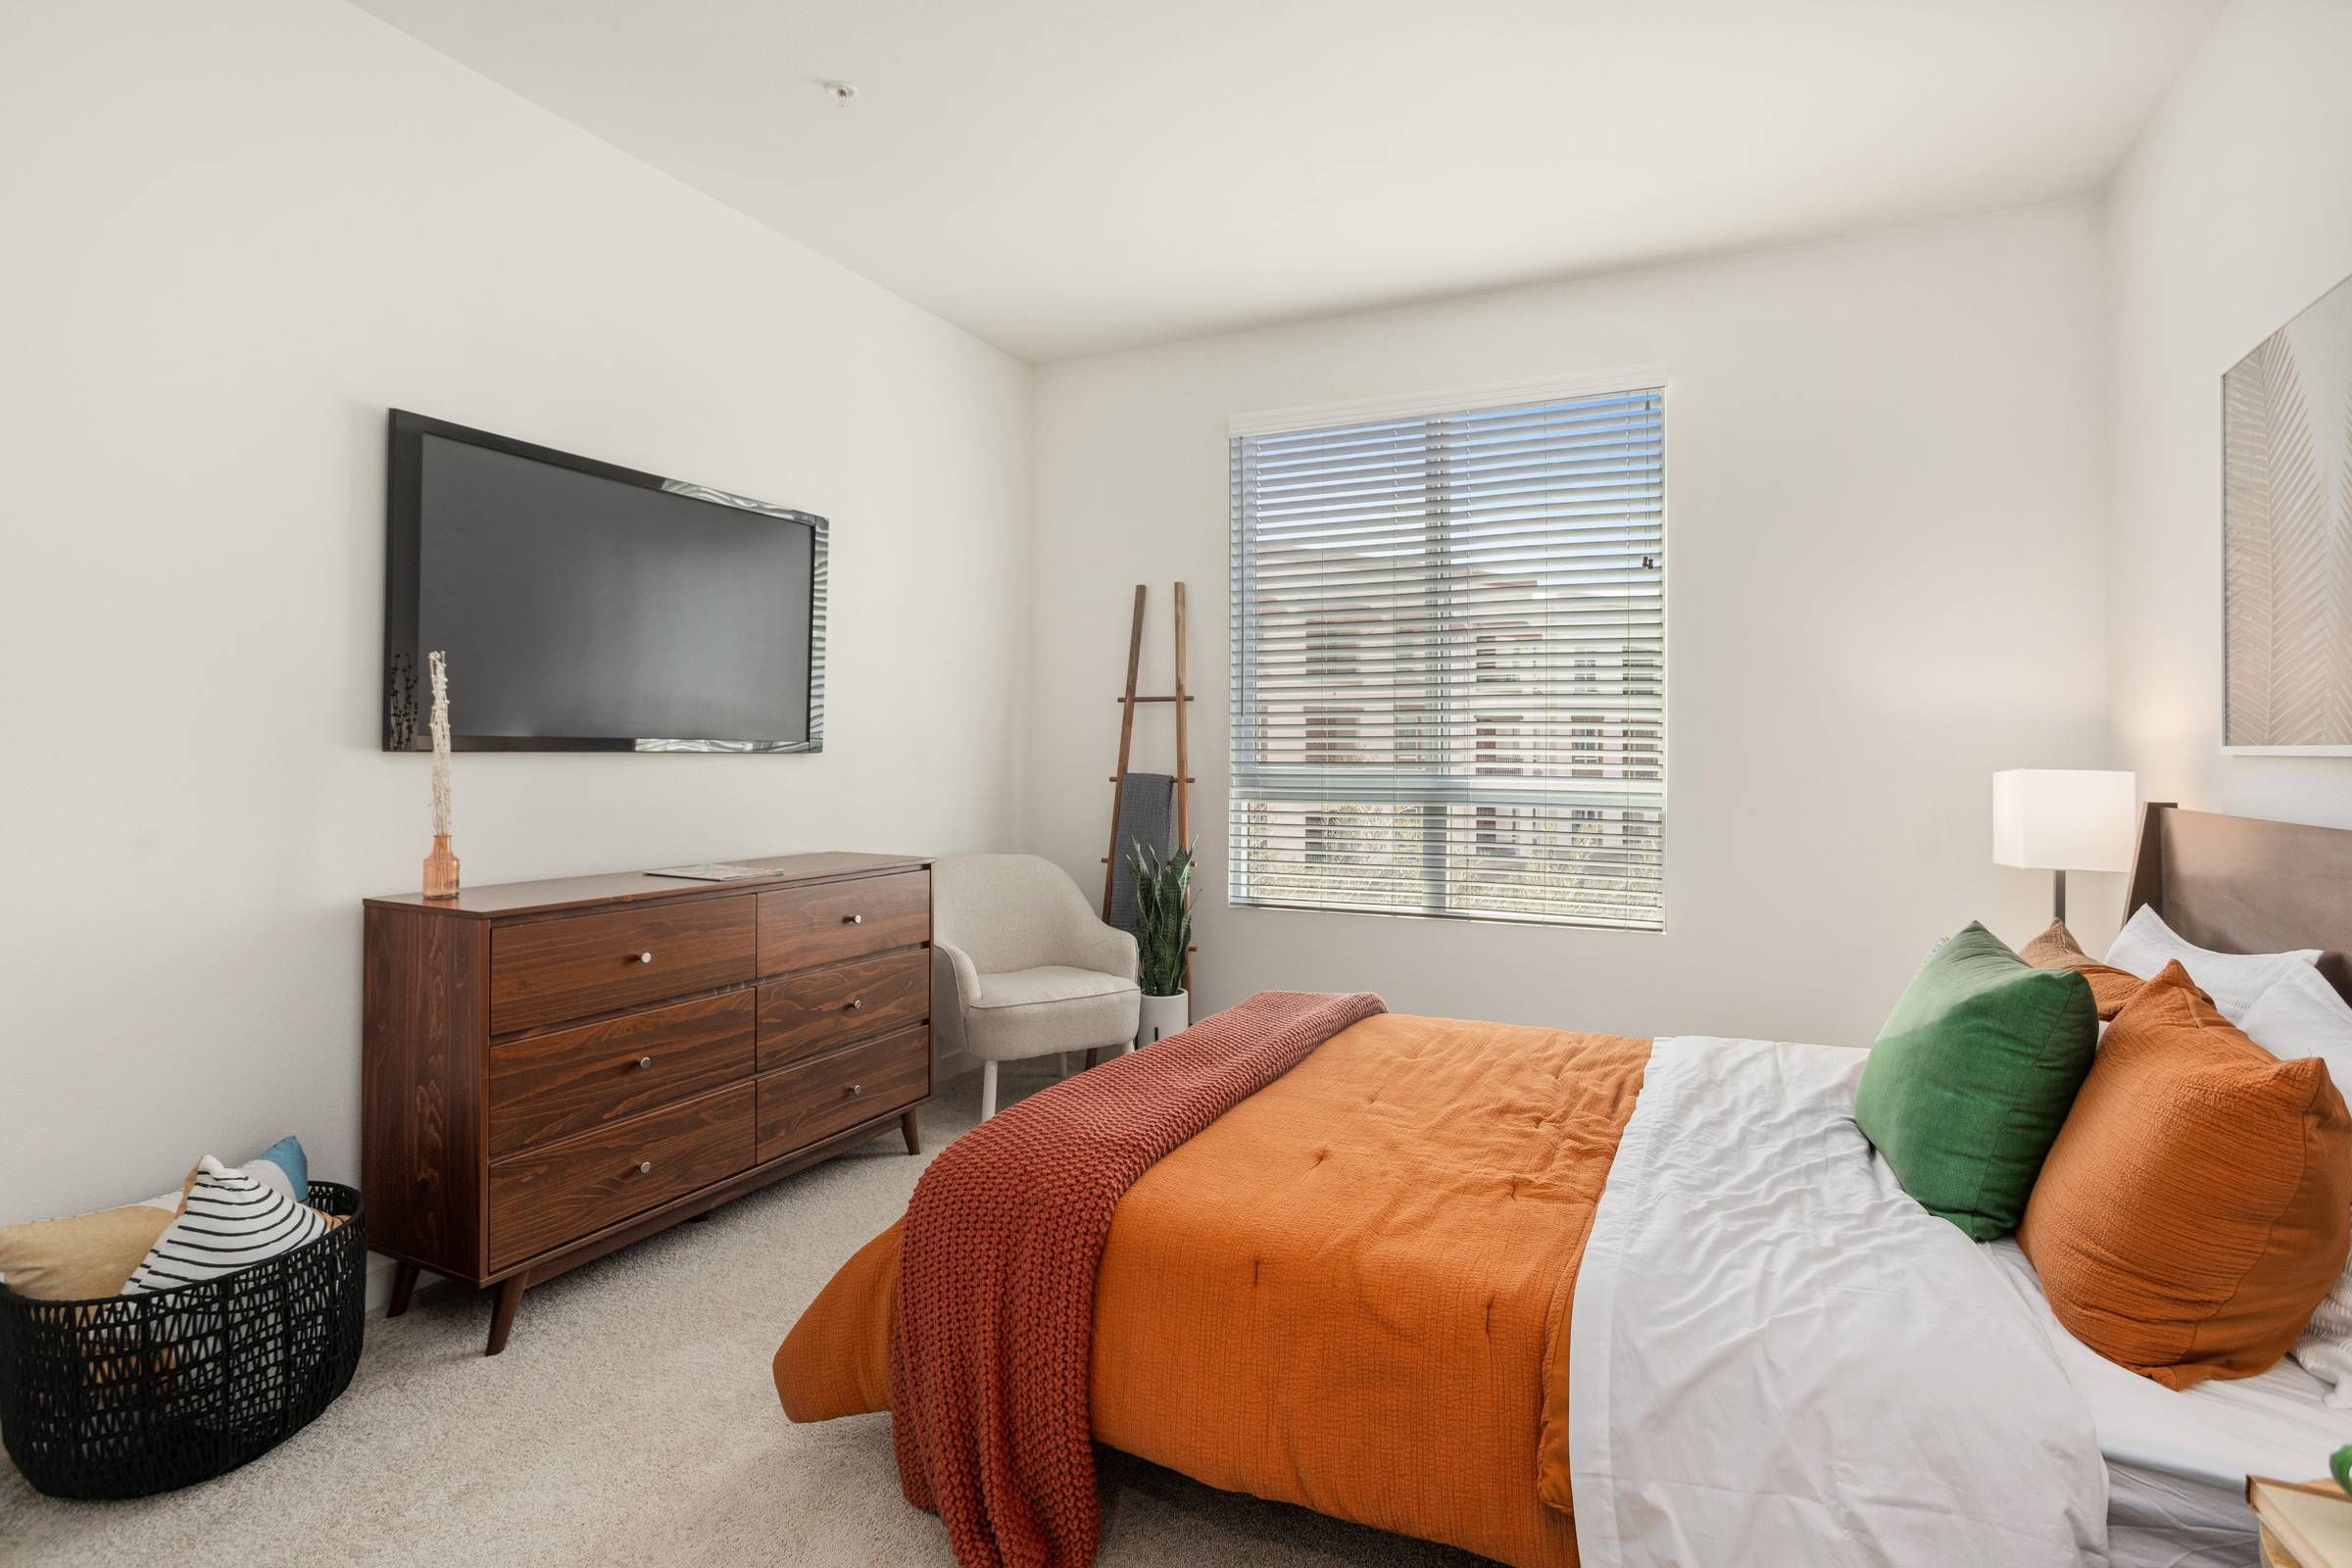 A comfortable bedroom in Alta Upland features a queen-sized bed with orange and green accents, a flat-screen TV, and a sunny window with views of the neighborhood.